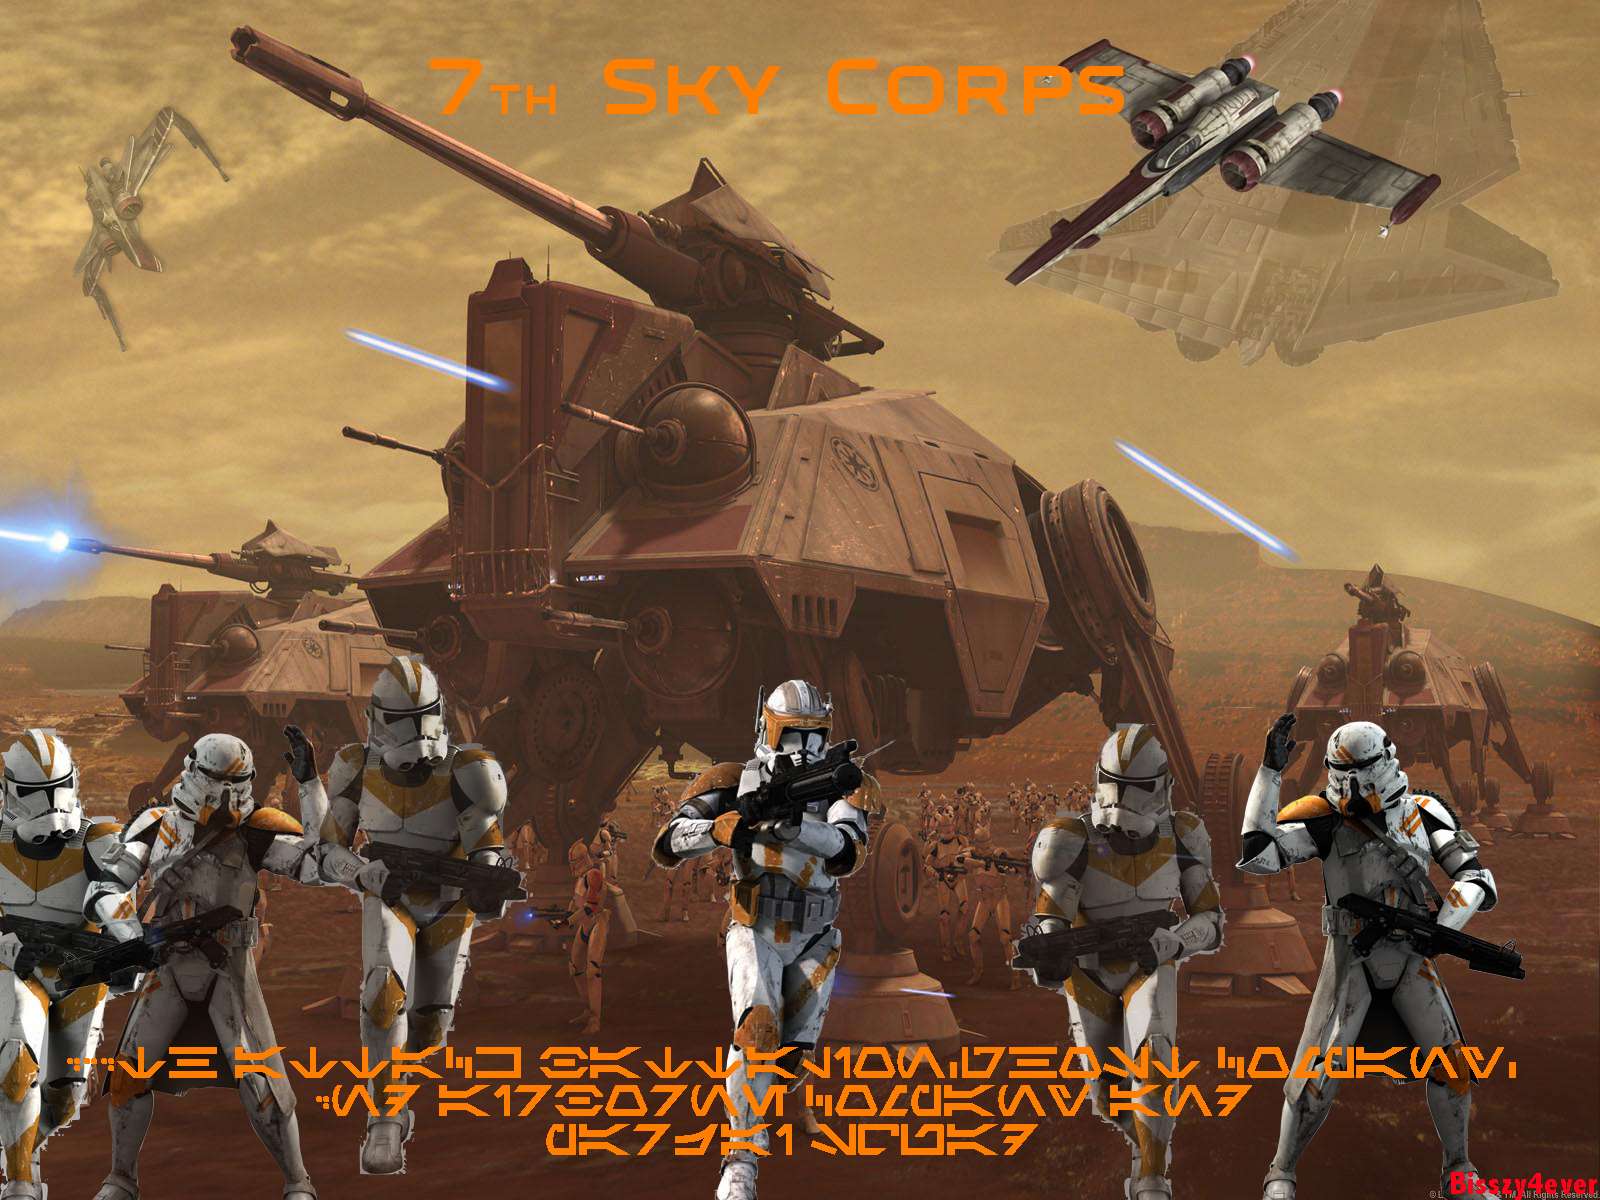 7th_Sky_Corps_By_Bisszy4ever.jpg